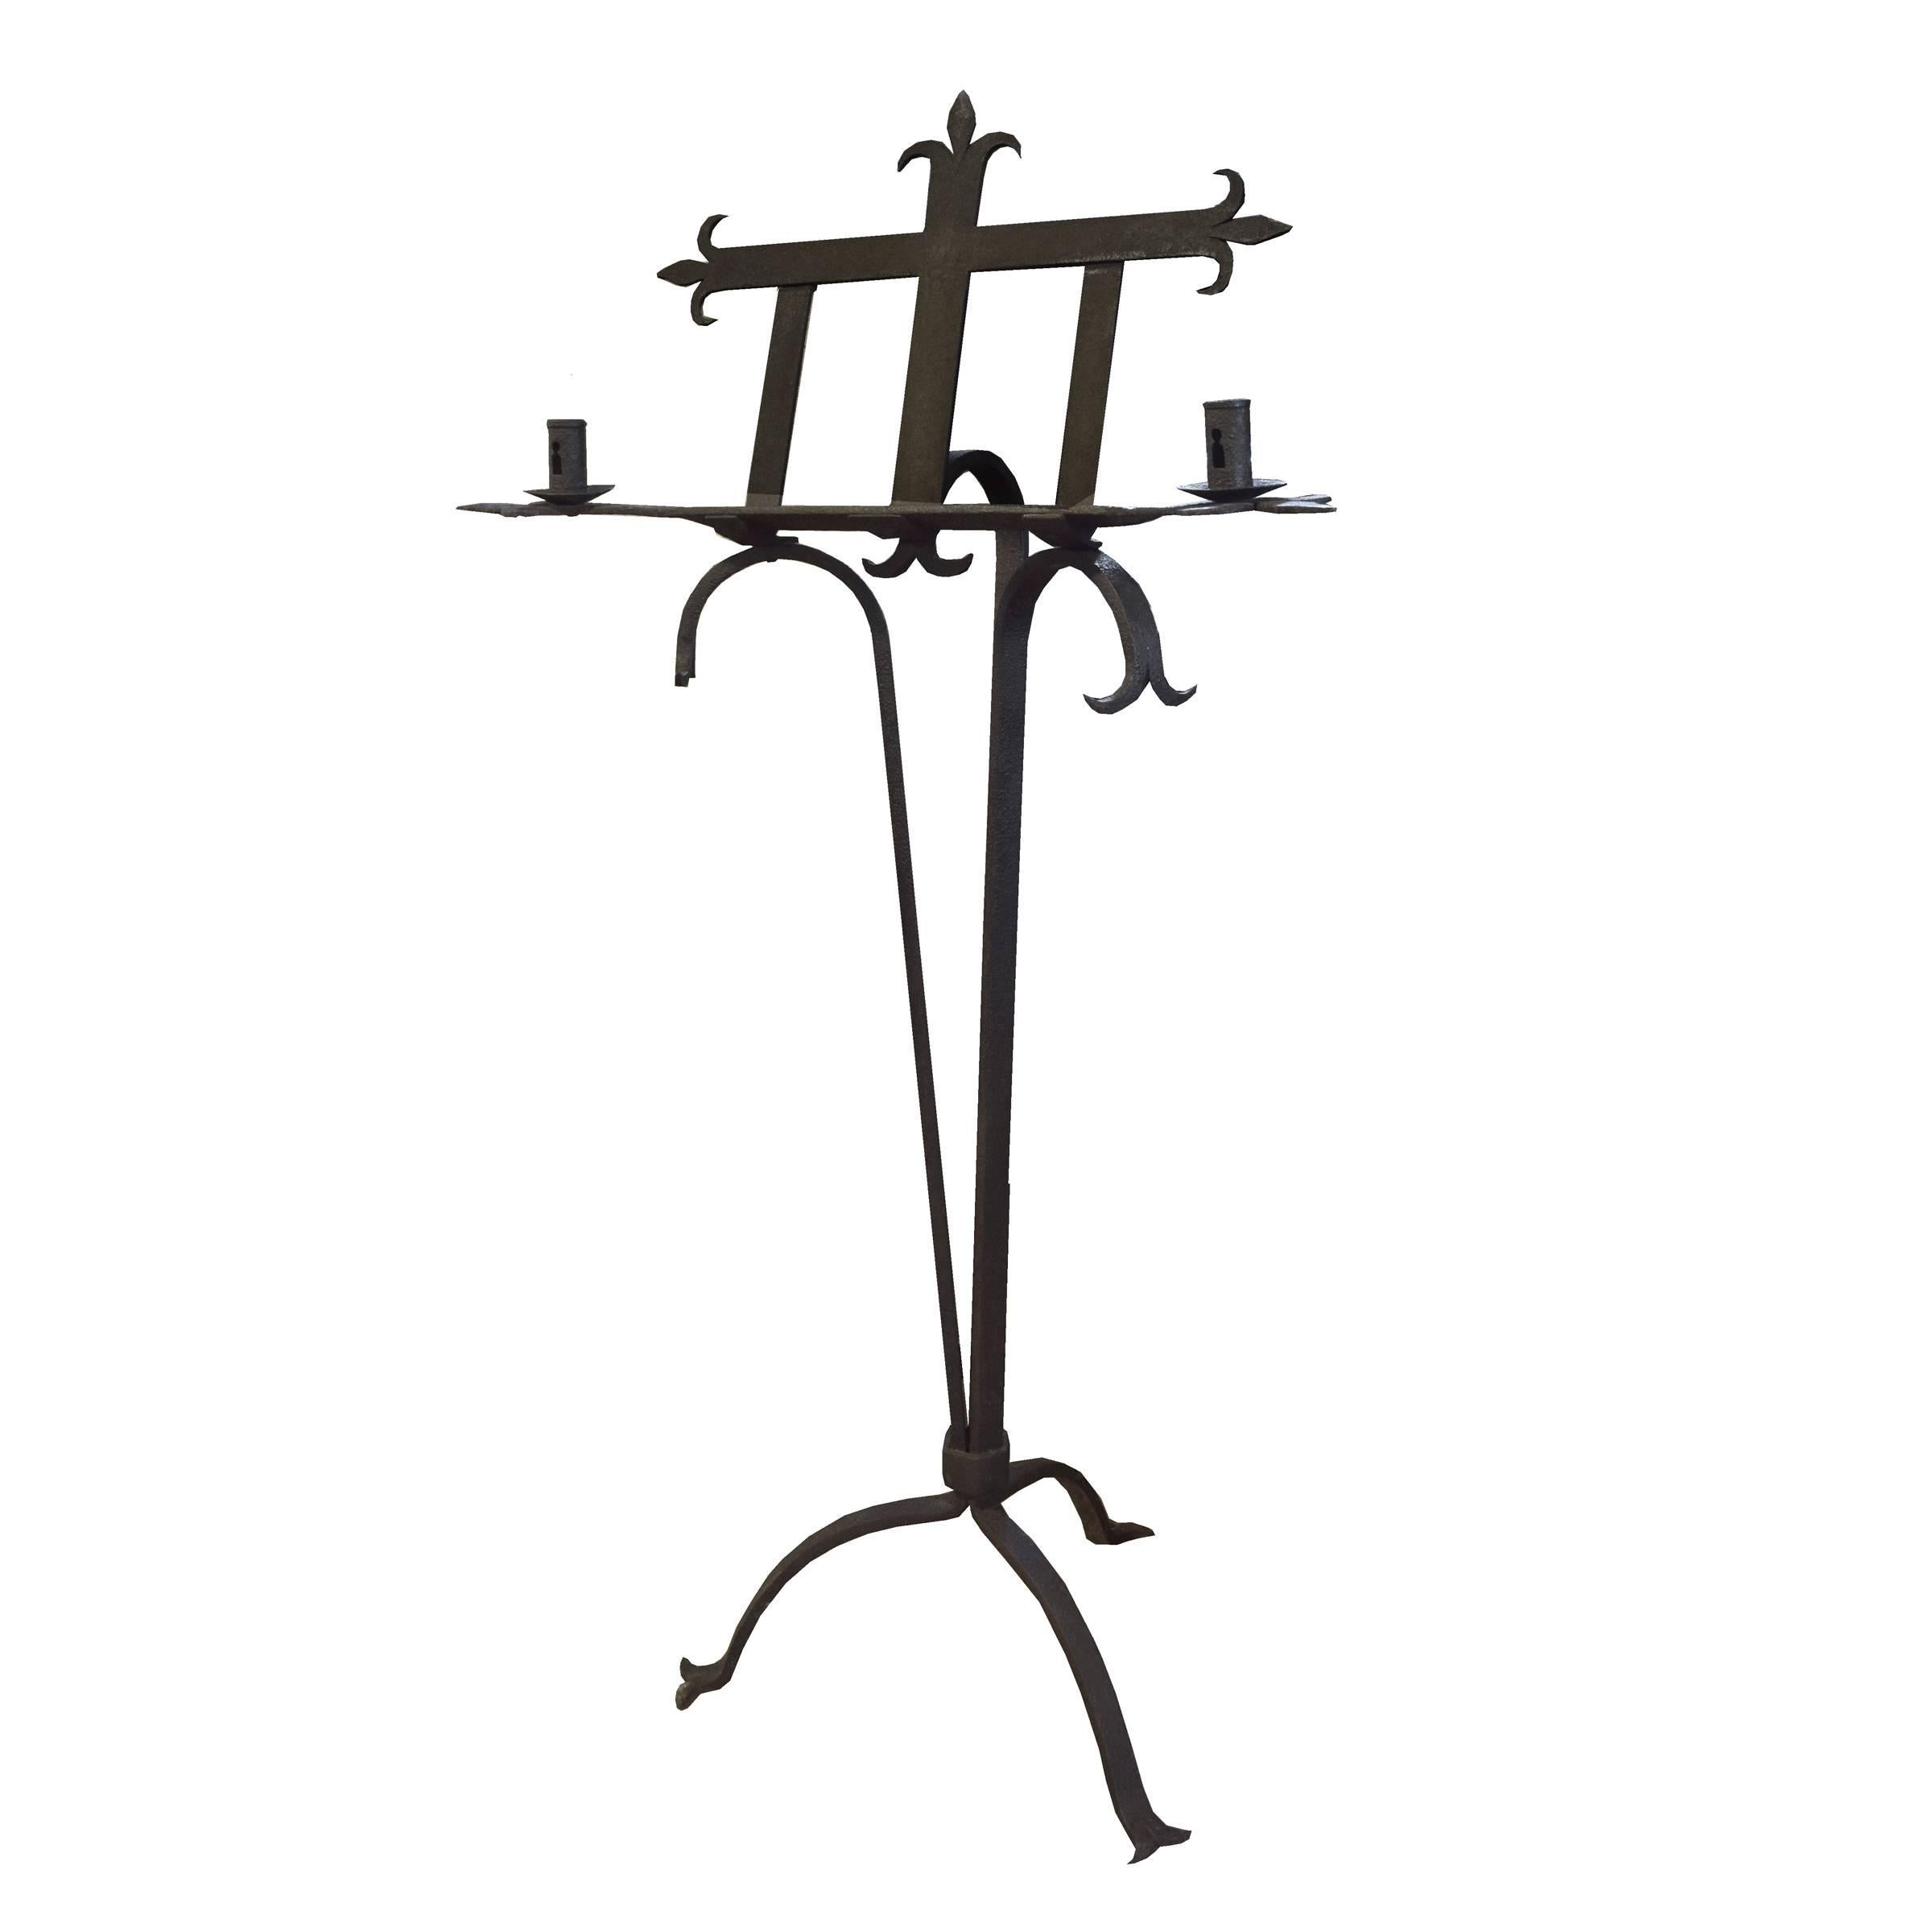 A fantastic French wrought iron book/ music stand with a fleur-de-lis motif, two candle holders, and three legs, circa 19th century.